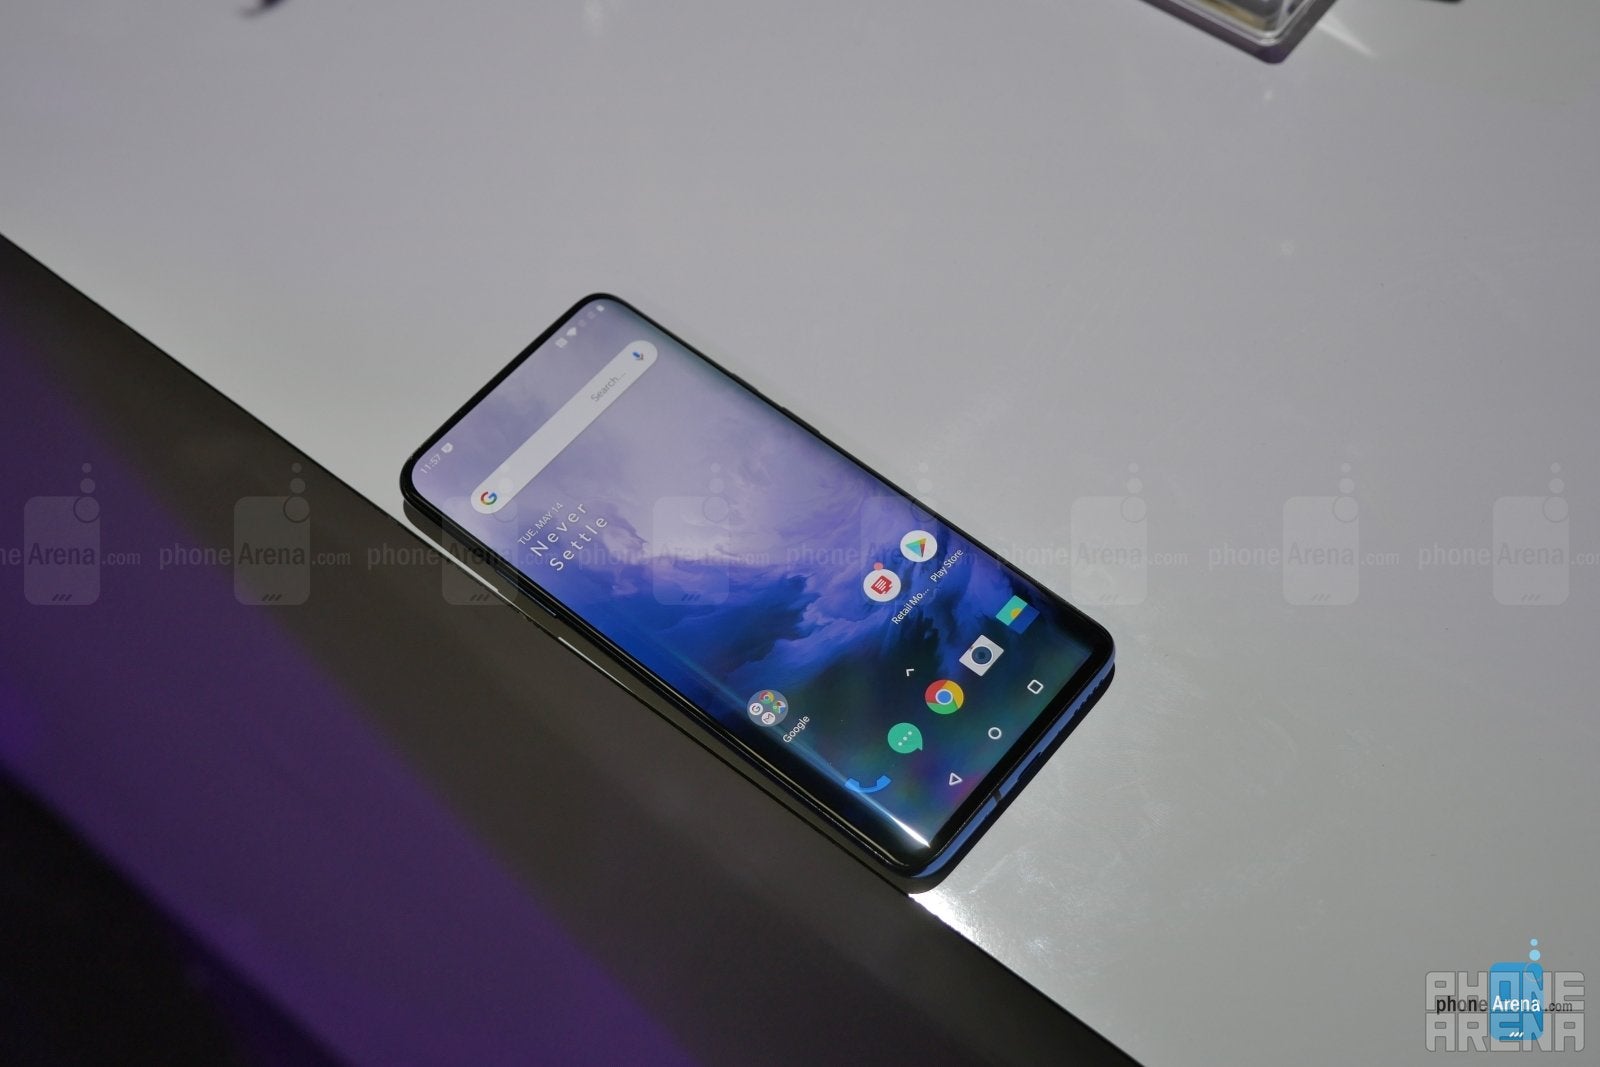 OnePlus 7 Pro hands-on: Full of surprises